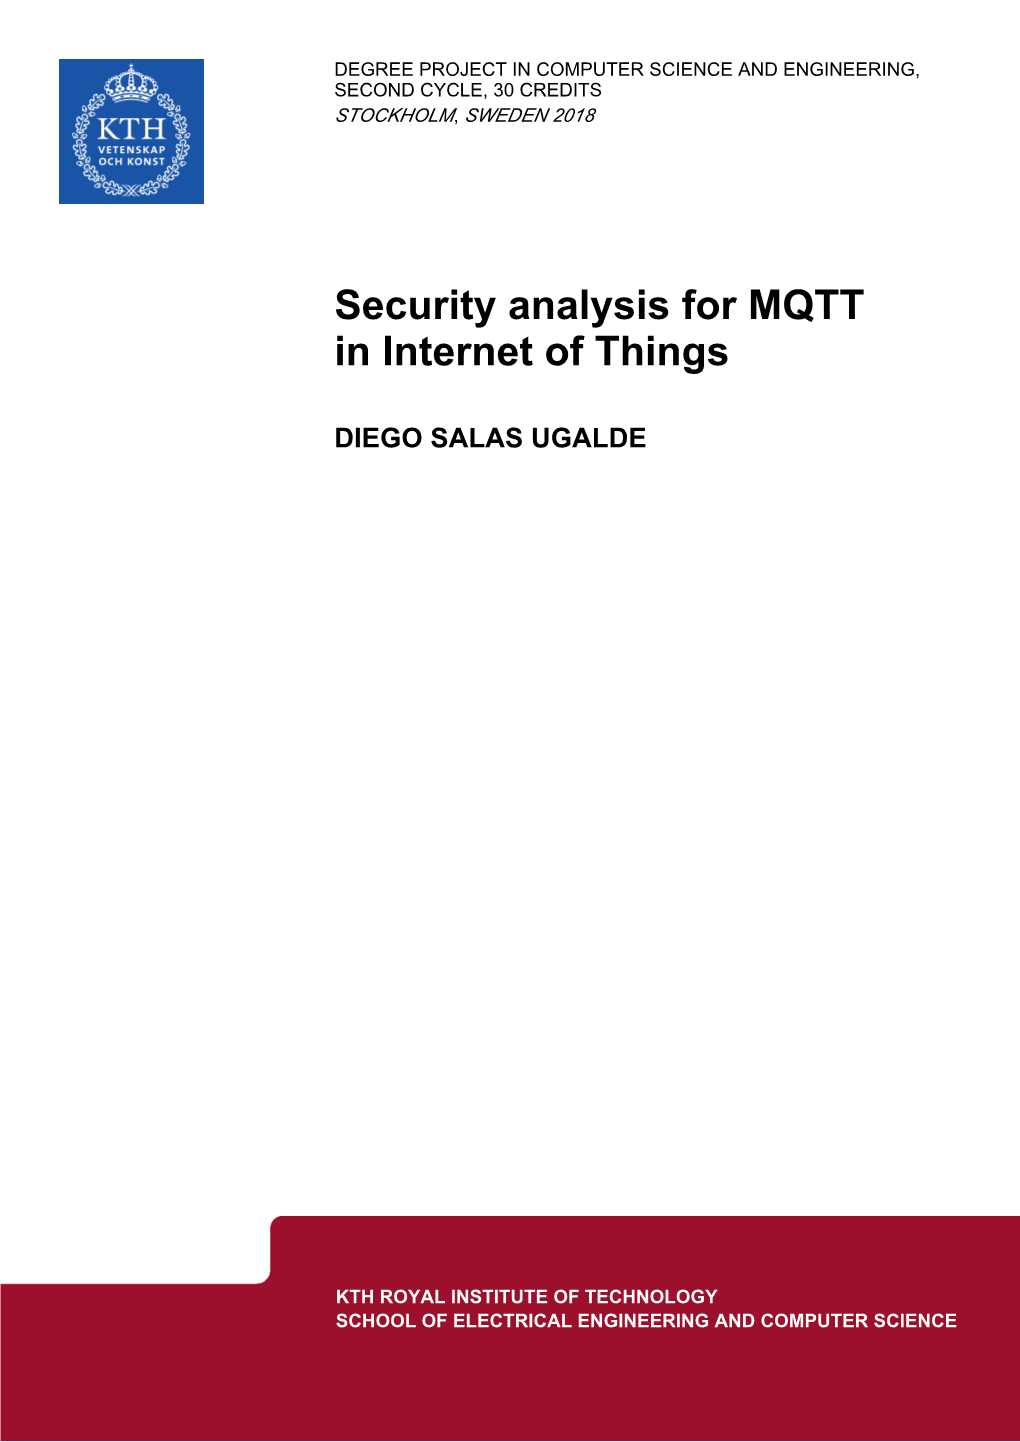 Security Analysis for MQTT in Internet of Things